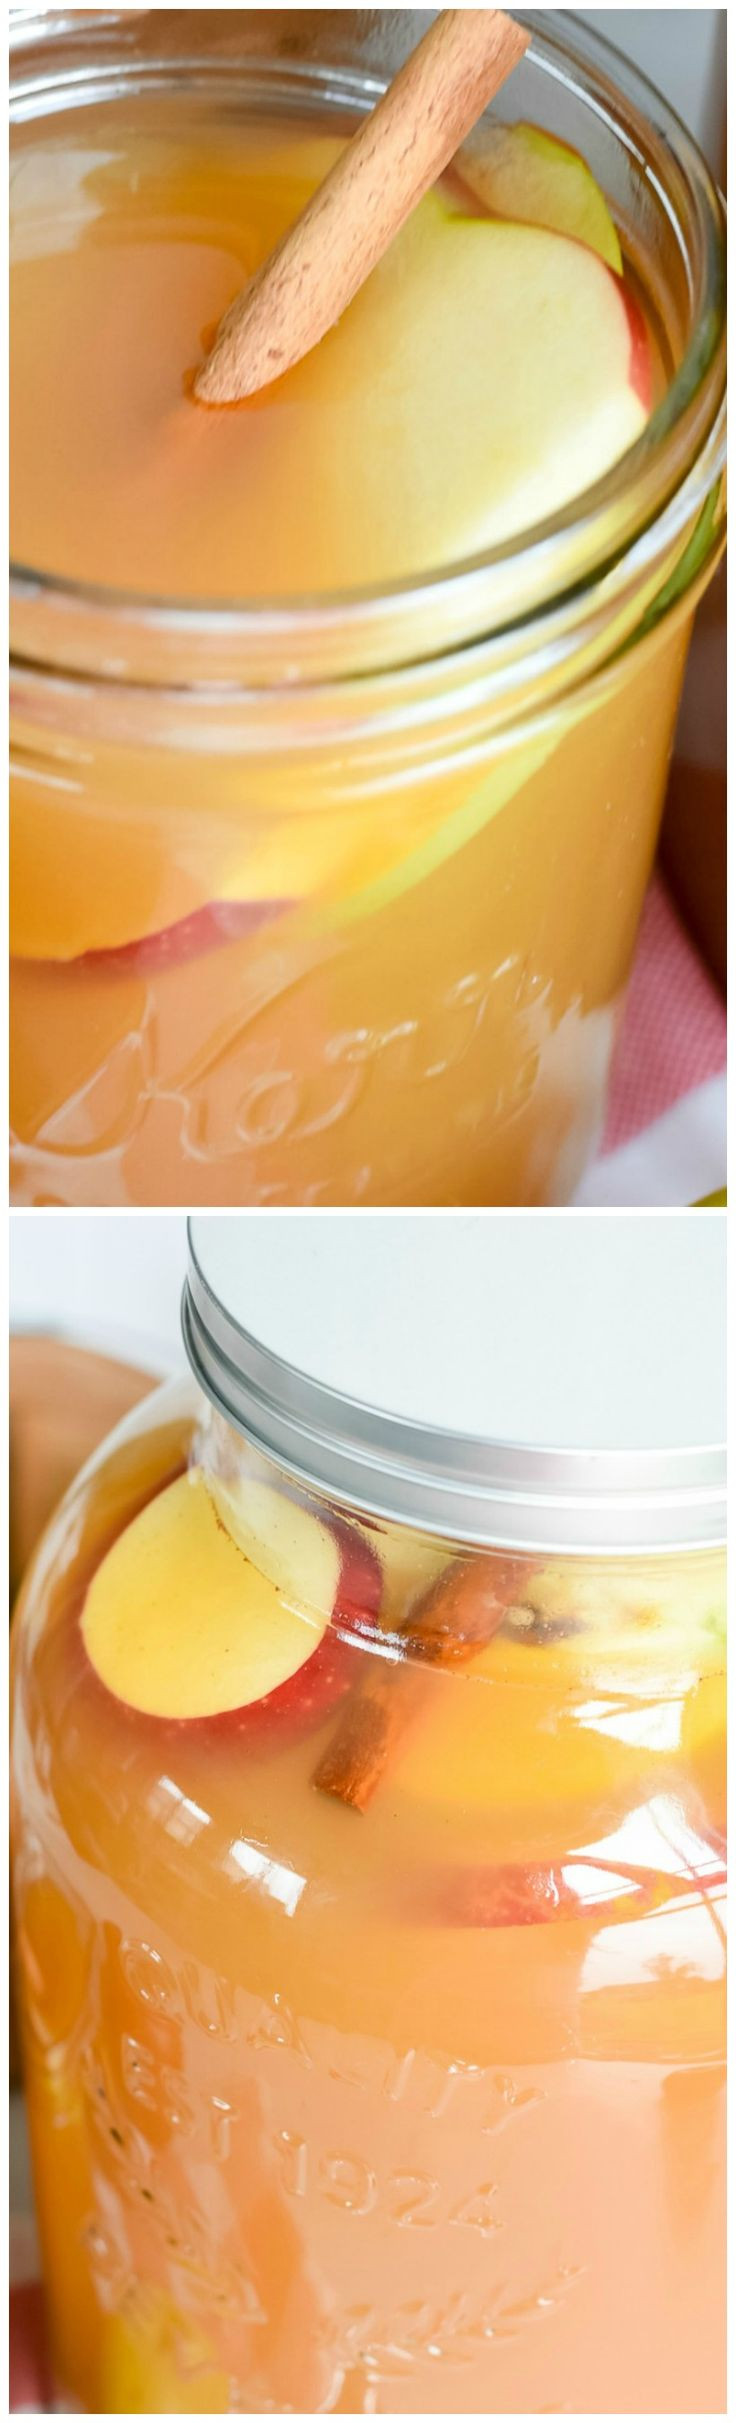 Thanksgiving Drinks For A Crowd
 Best 25 Thanksgiving punch ideas on Pinterest